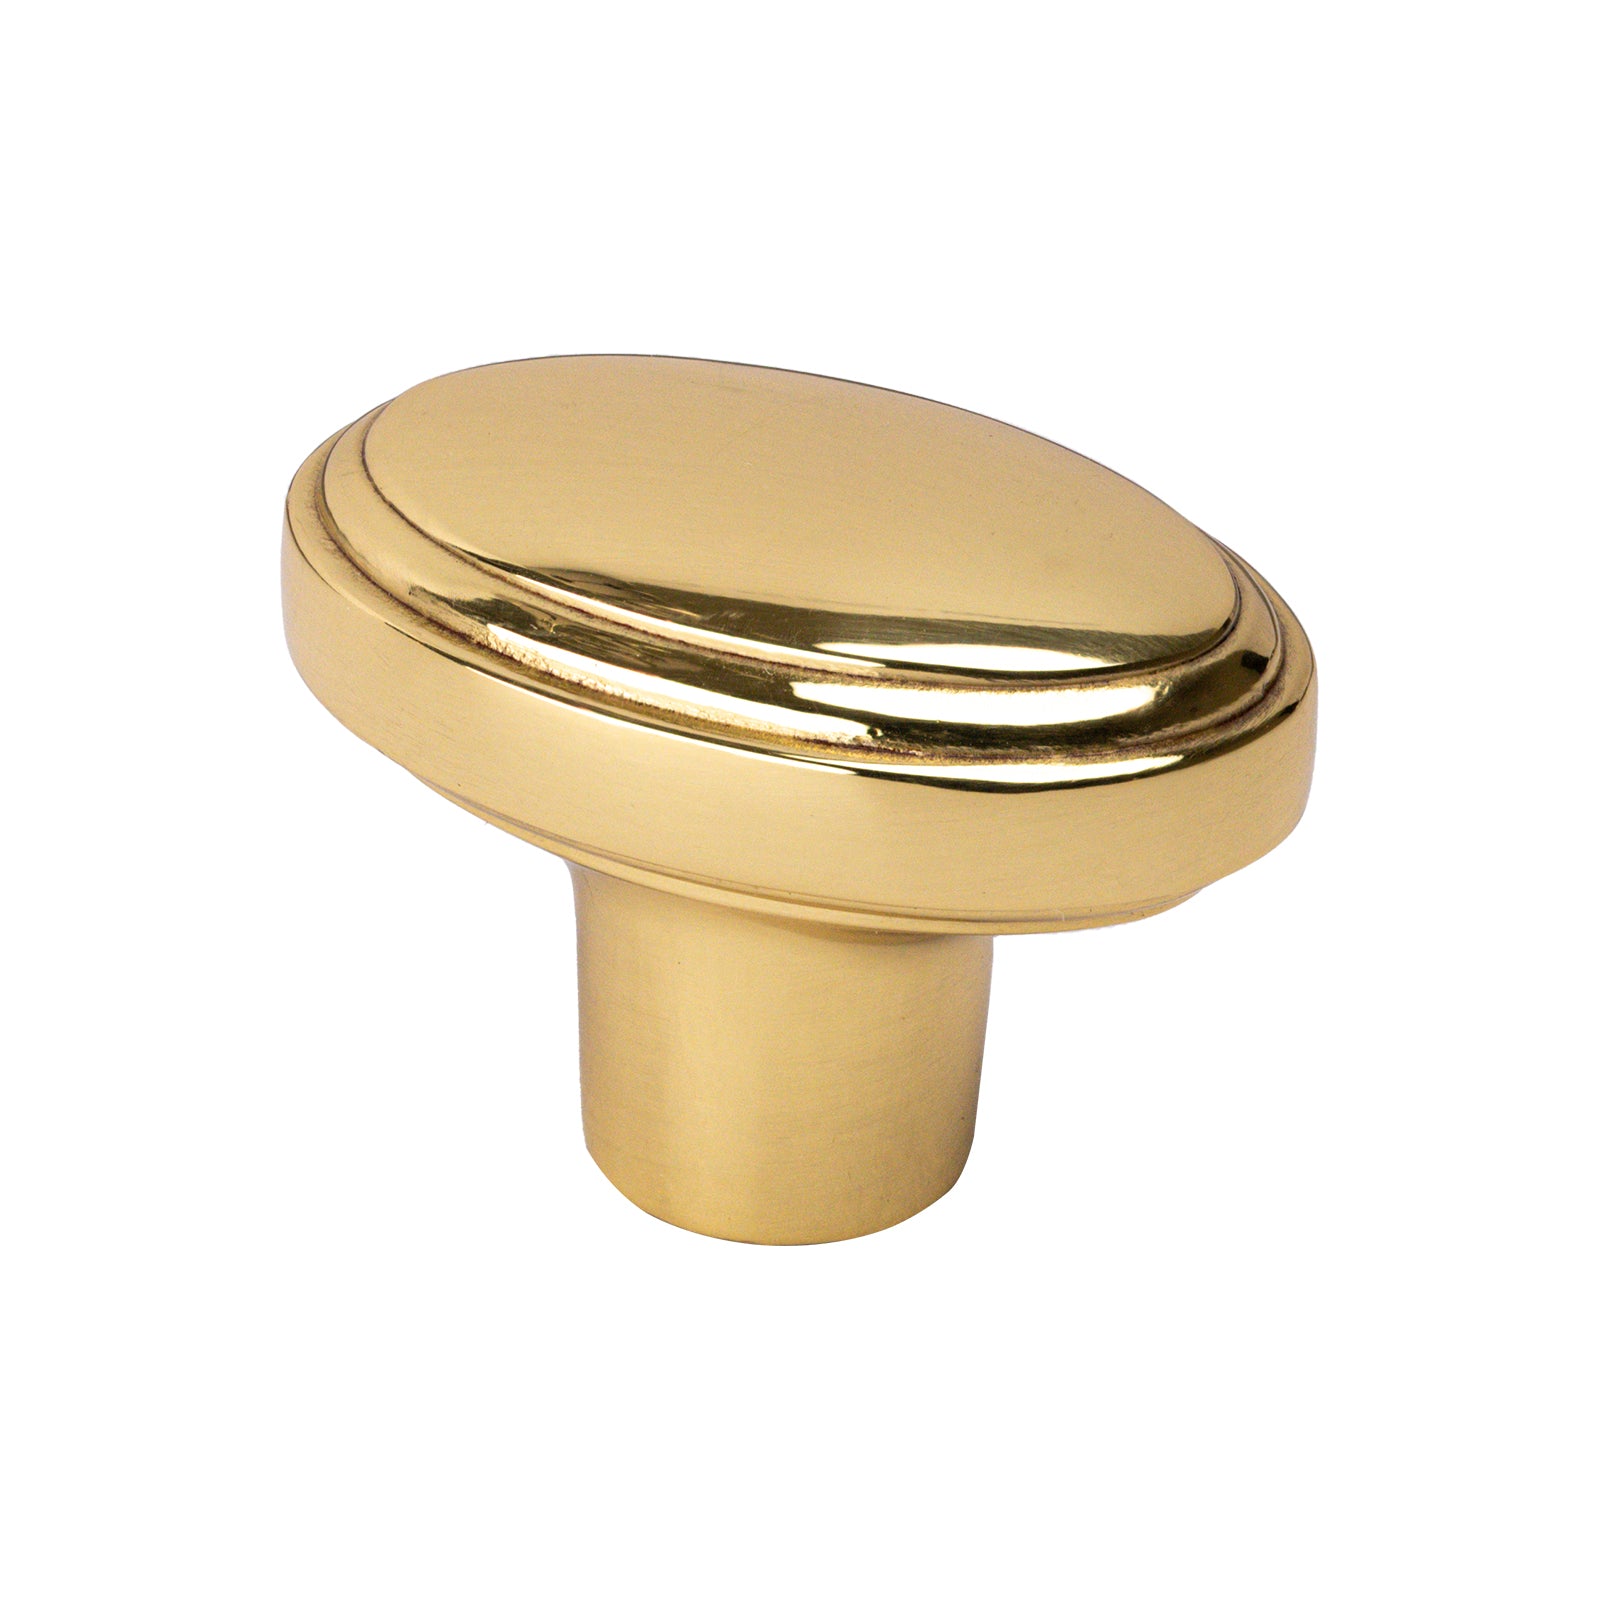 brass stepped oval cabinet knobs, kitchen cupboard knobs SHOW